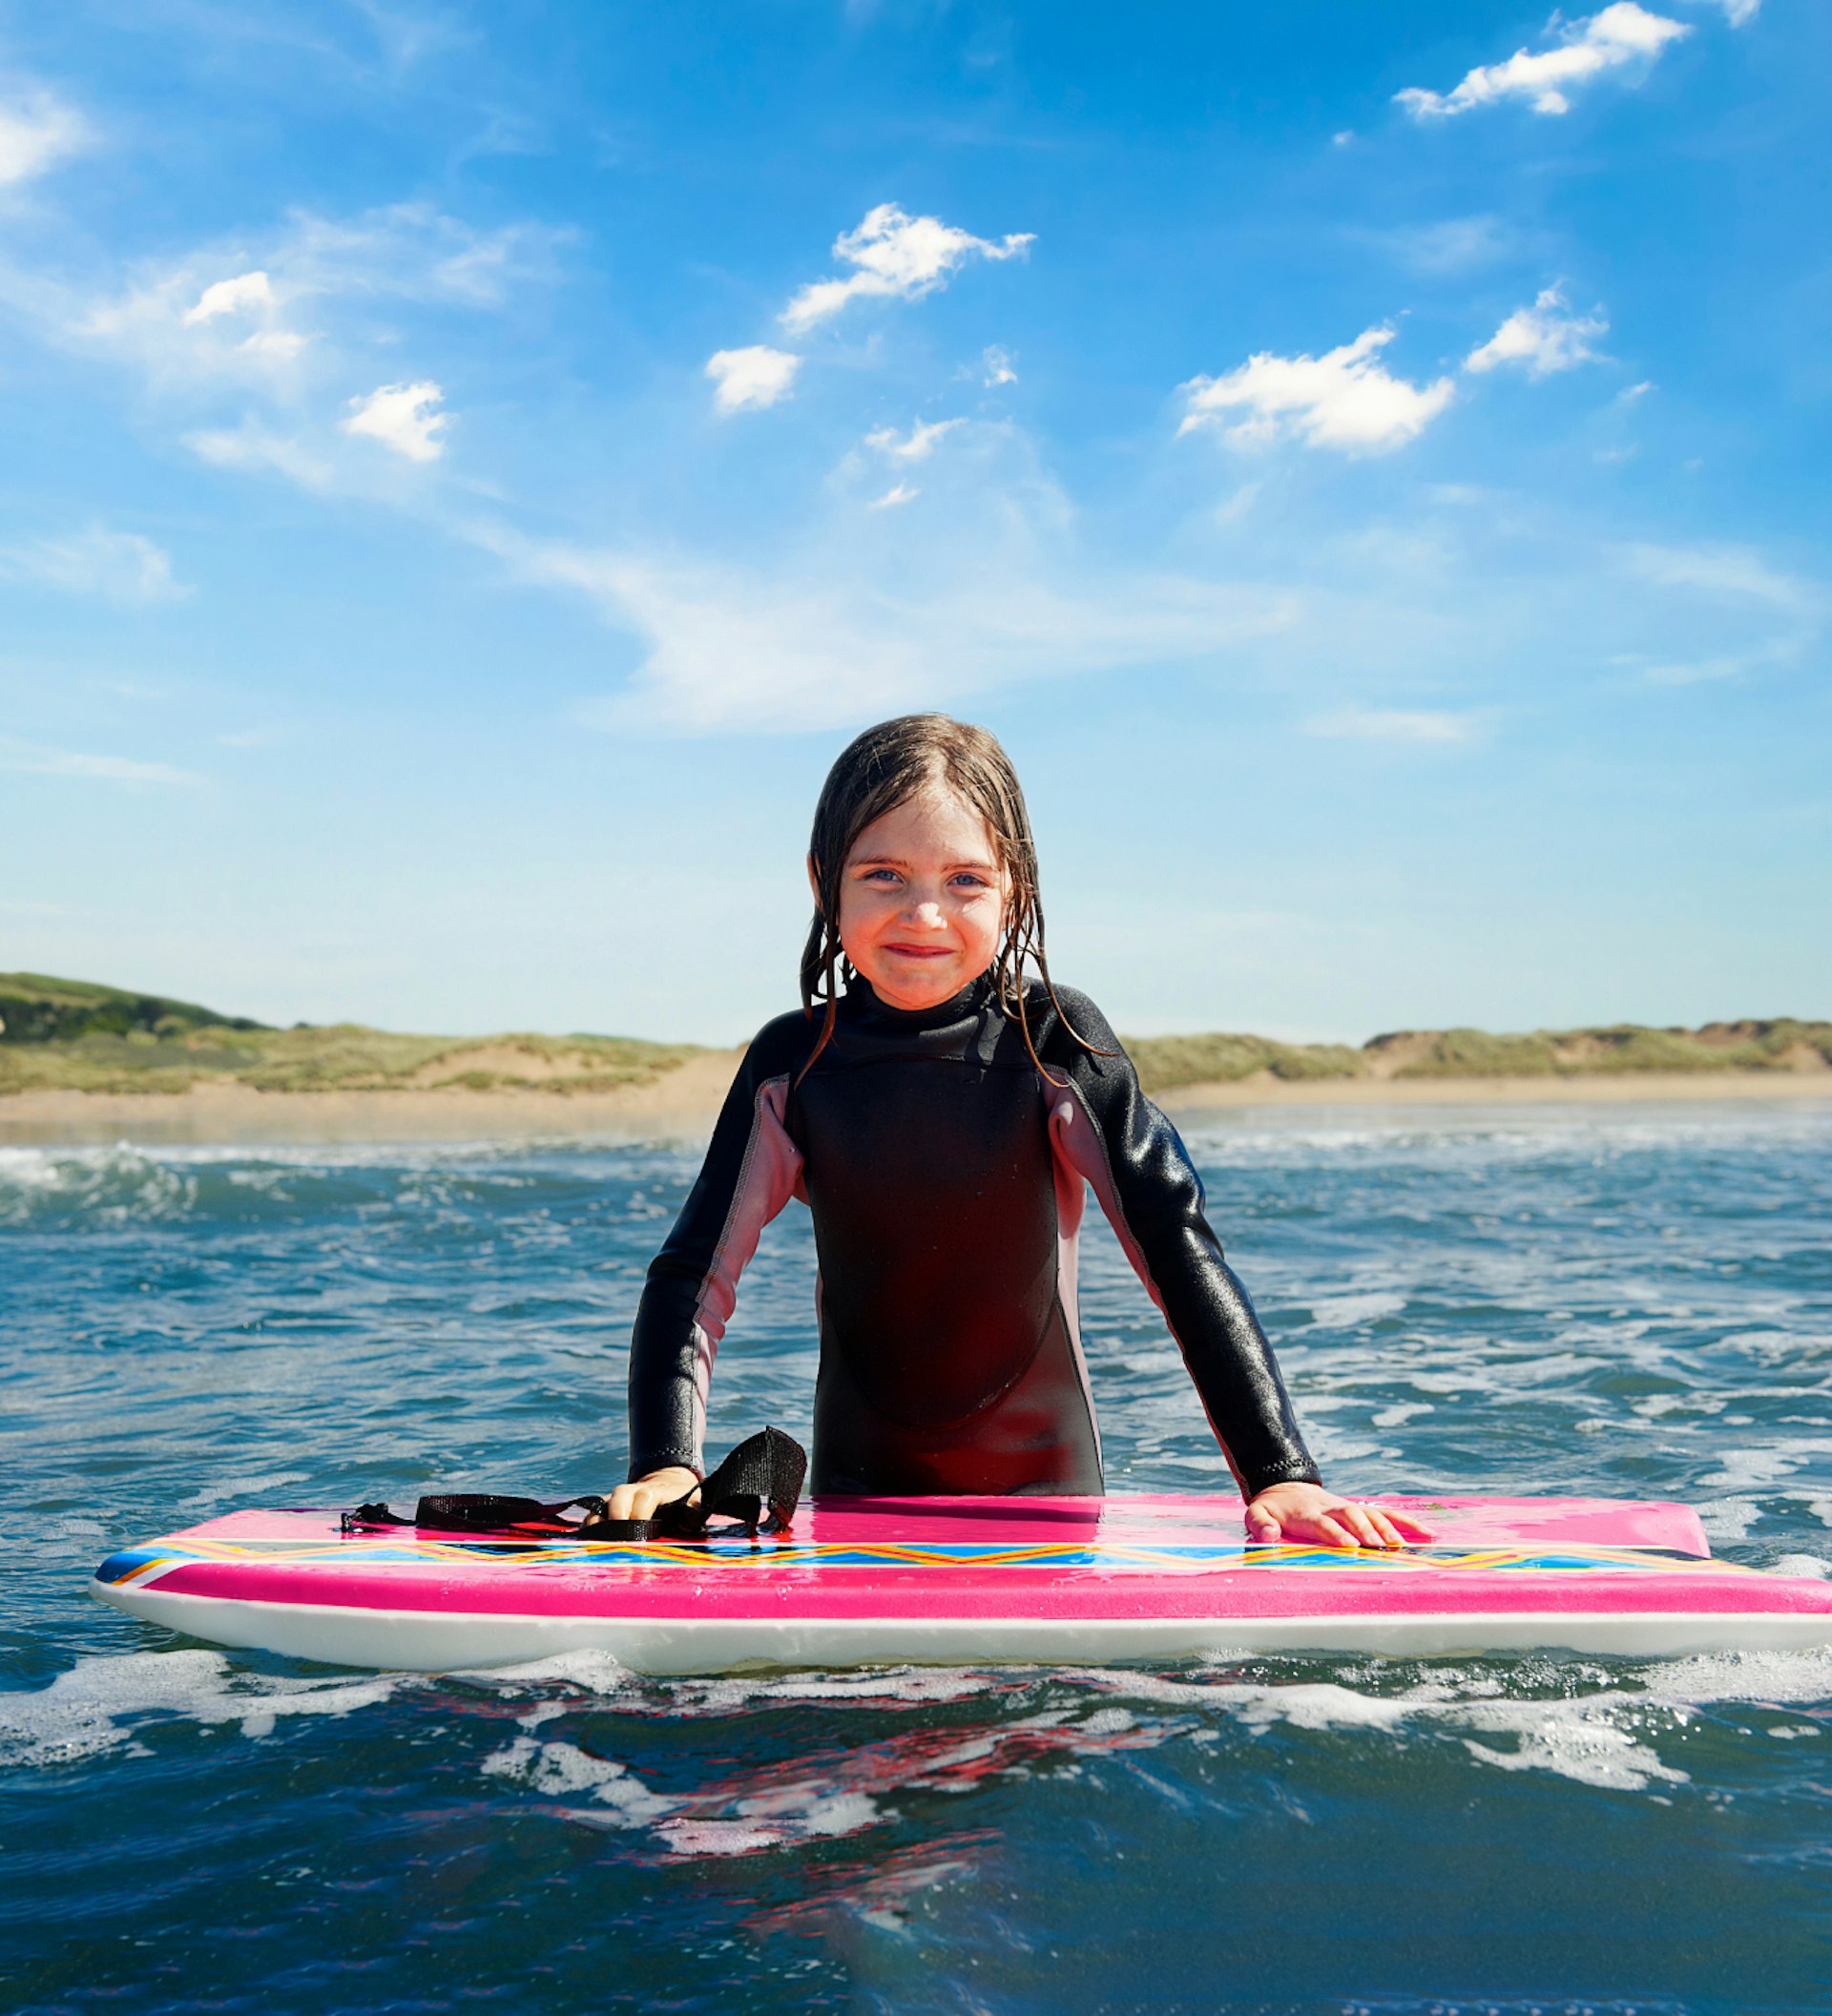 A young girl in a wet suit stands in the sea with her hands on a boogie board.